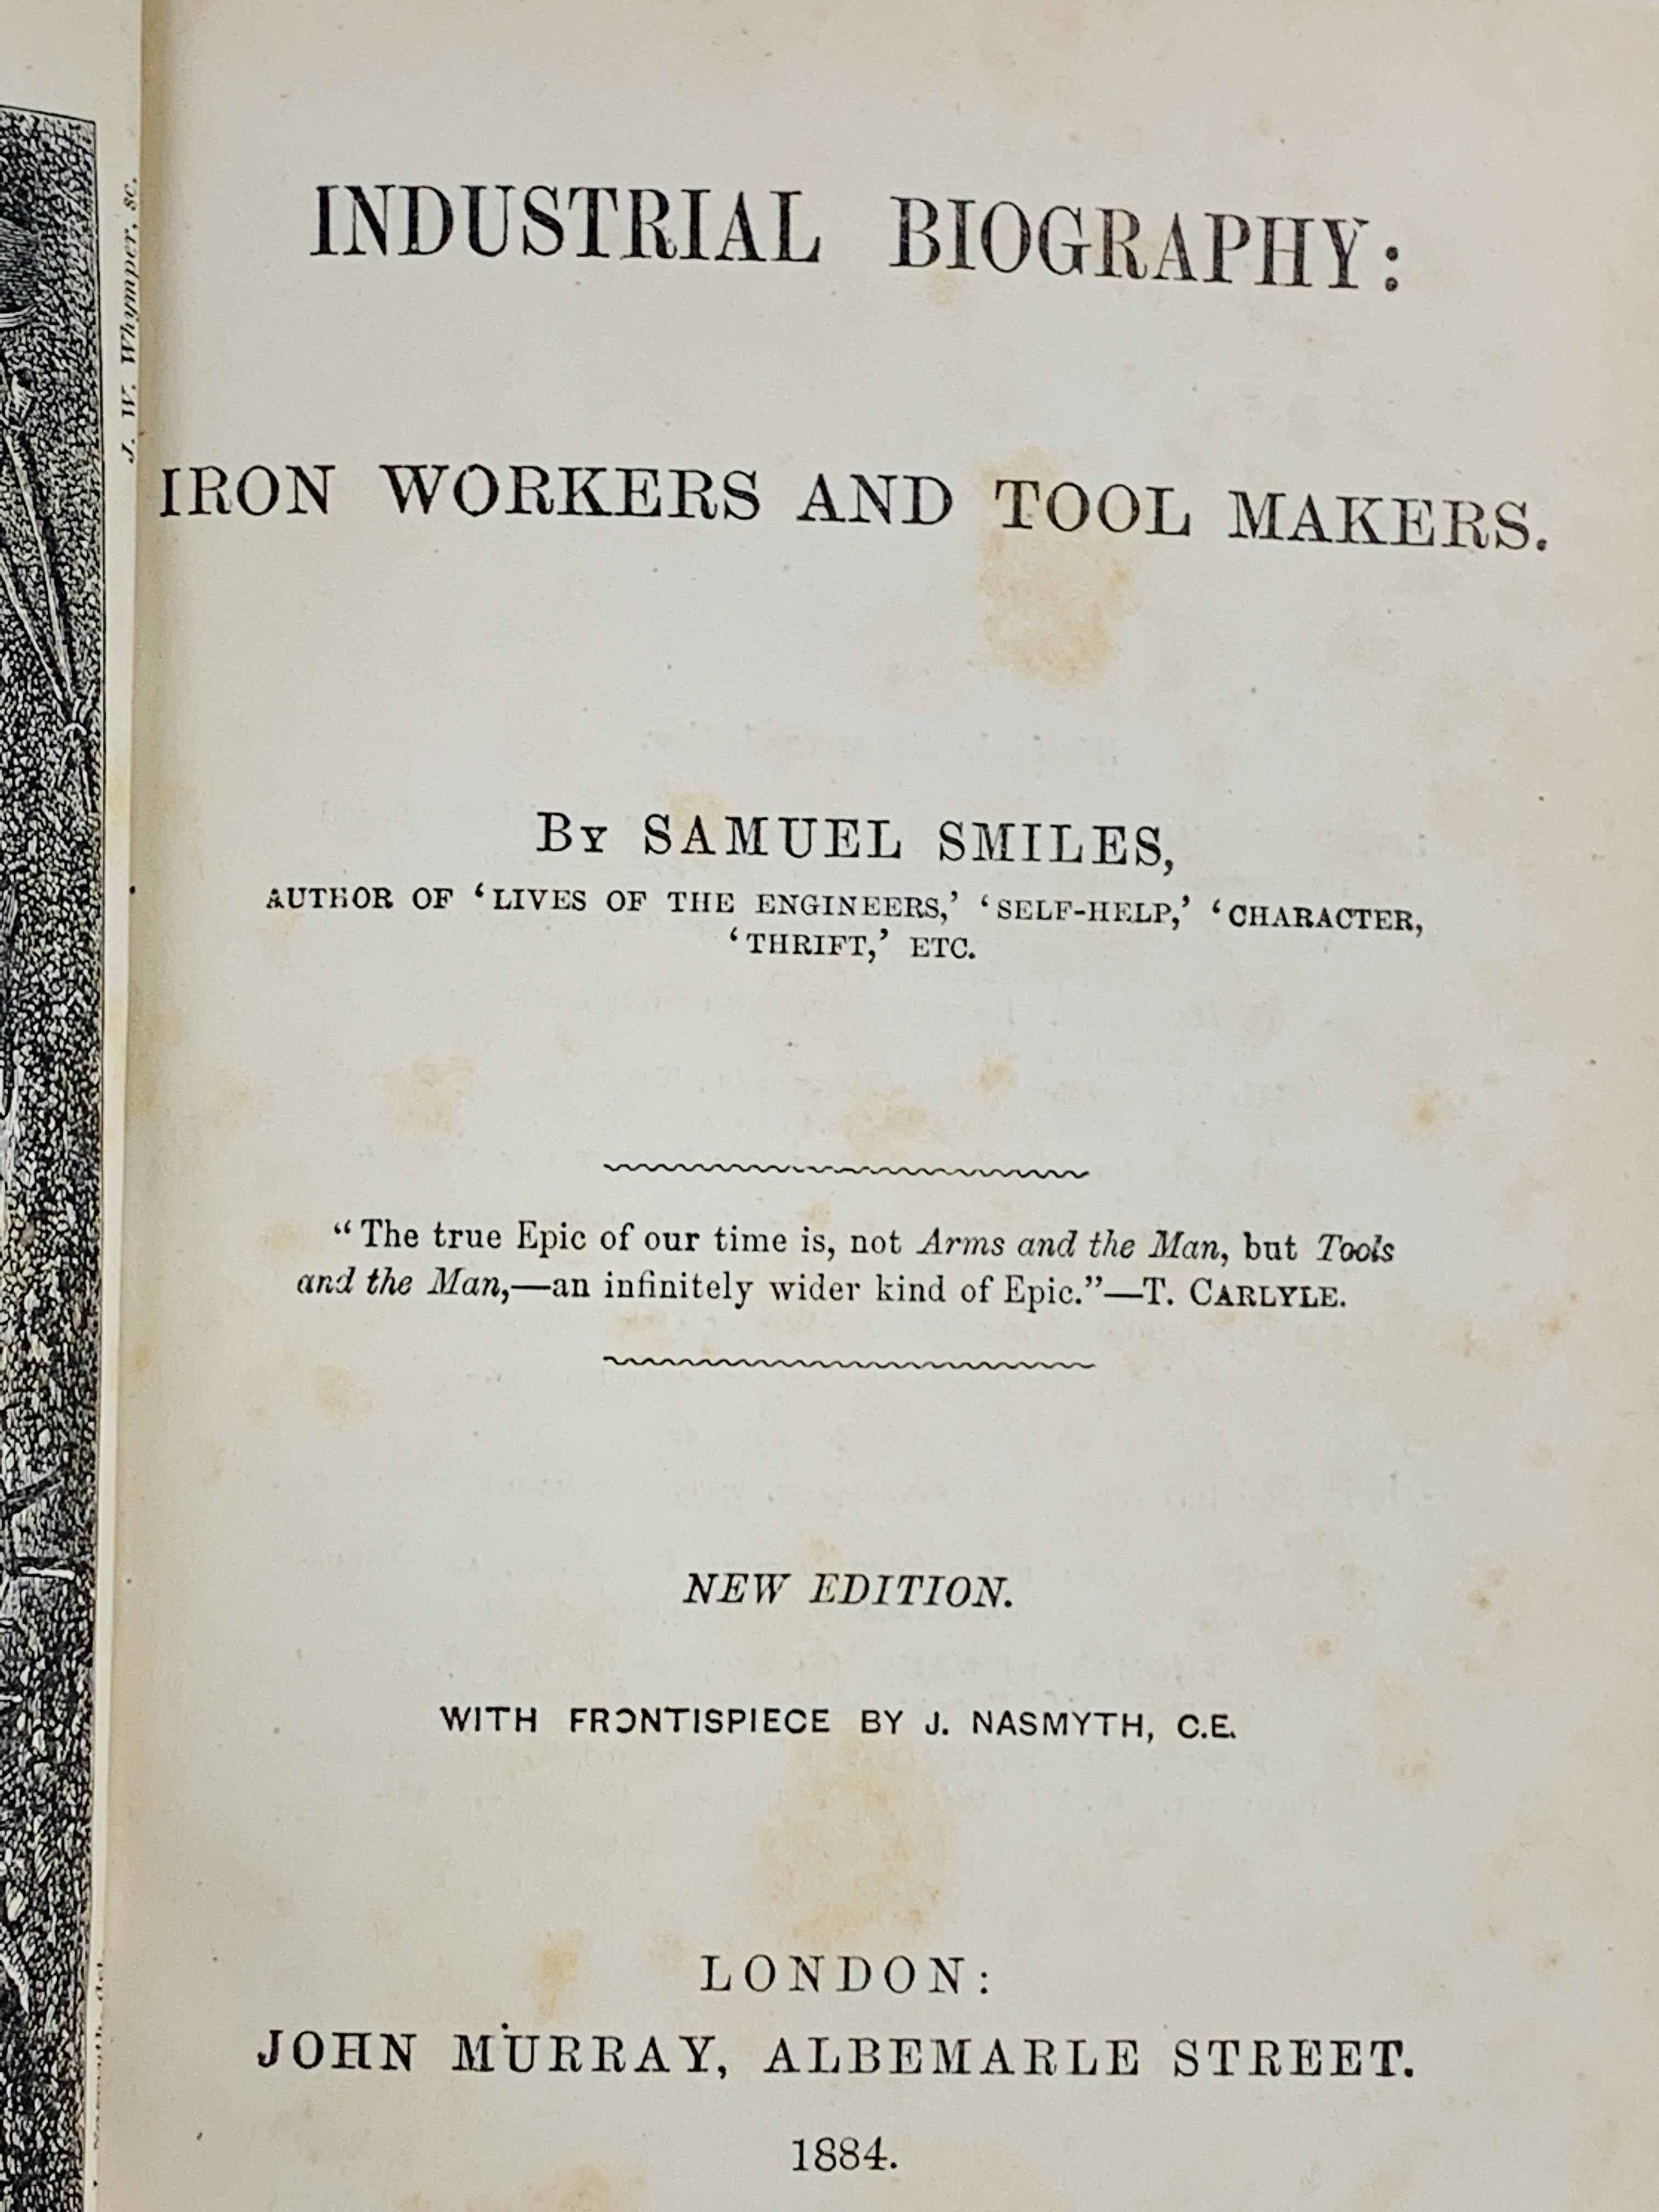 Industrial Biography by Samuel Smiles 1884 - Image 2 of 2